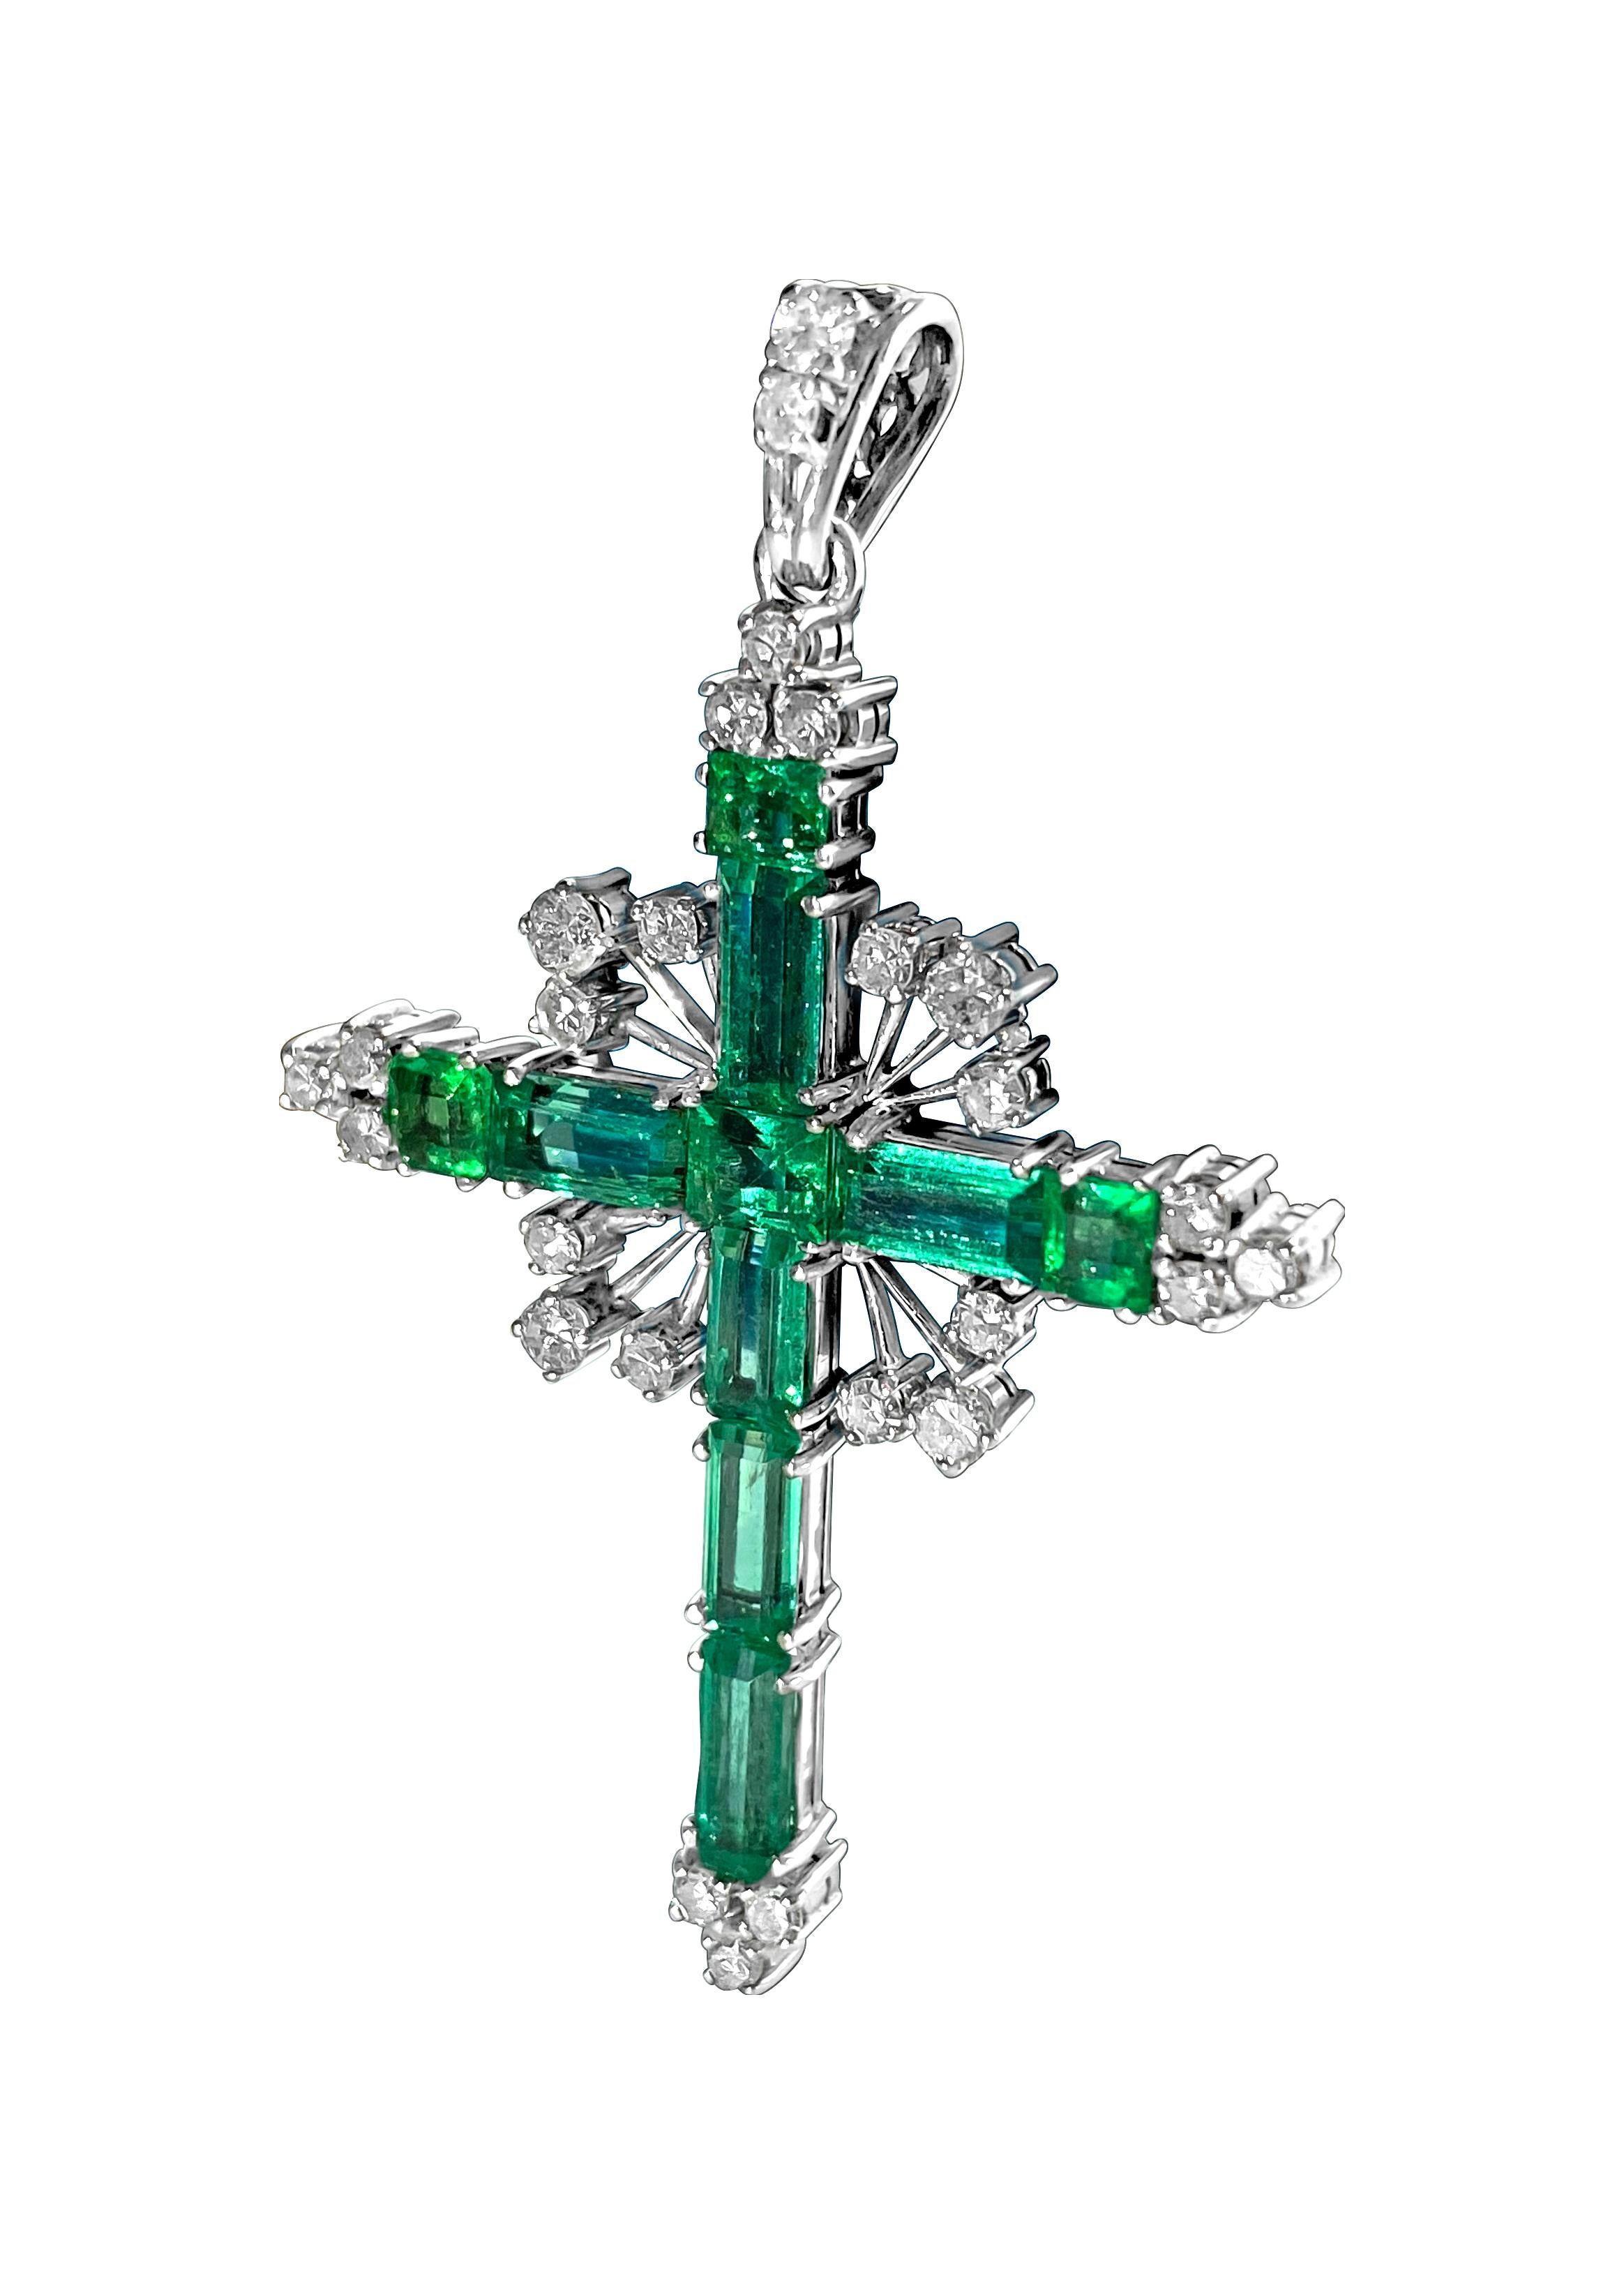 18K white gold. 
12.50 ct emeralds. 100% natural earth mined Colombian emeralds. 
1.50CT diamonds, VS-SI clarity and F-G color. All precious stones set in prong setting.
Certified by GIA graduate gemologist, AGI New York. 